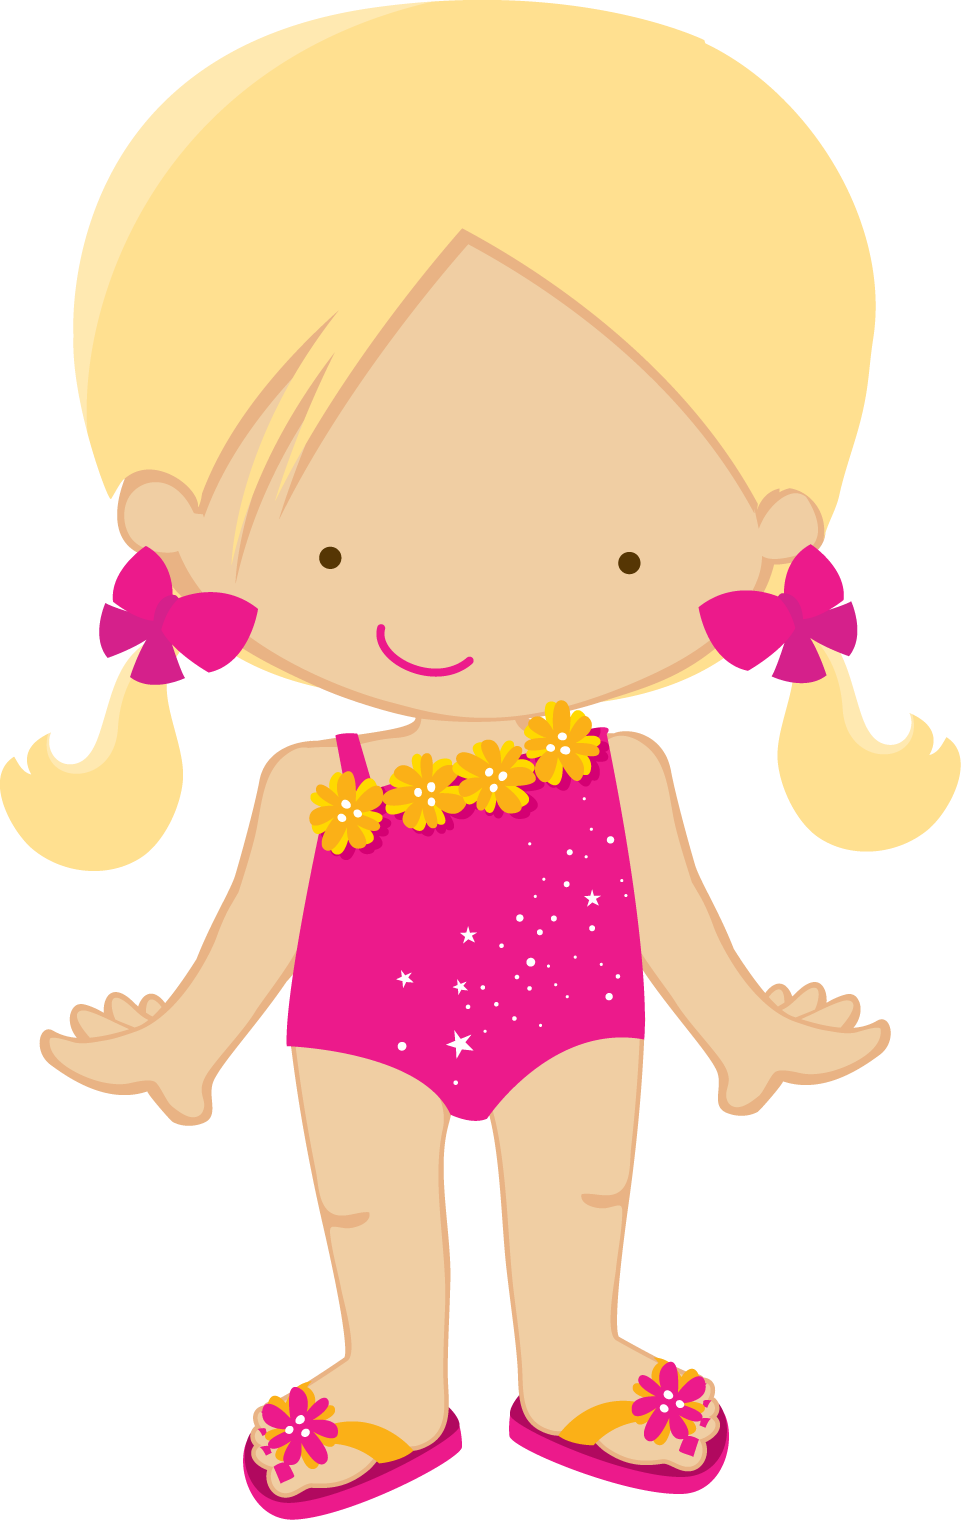 Girly clipart summer. Zwd umbrella poolgirl png